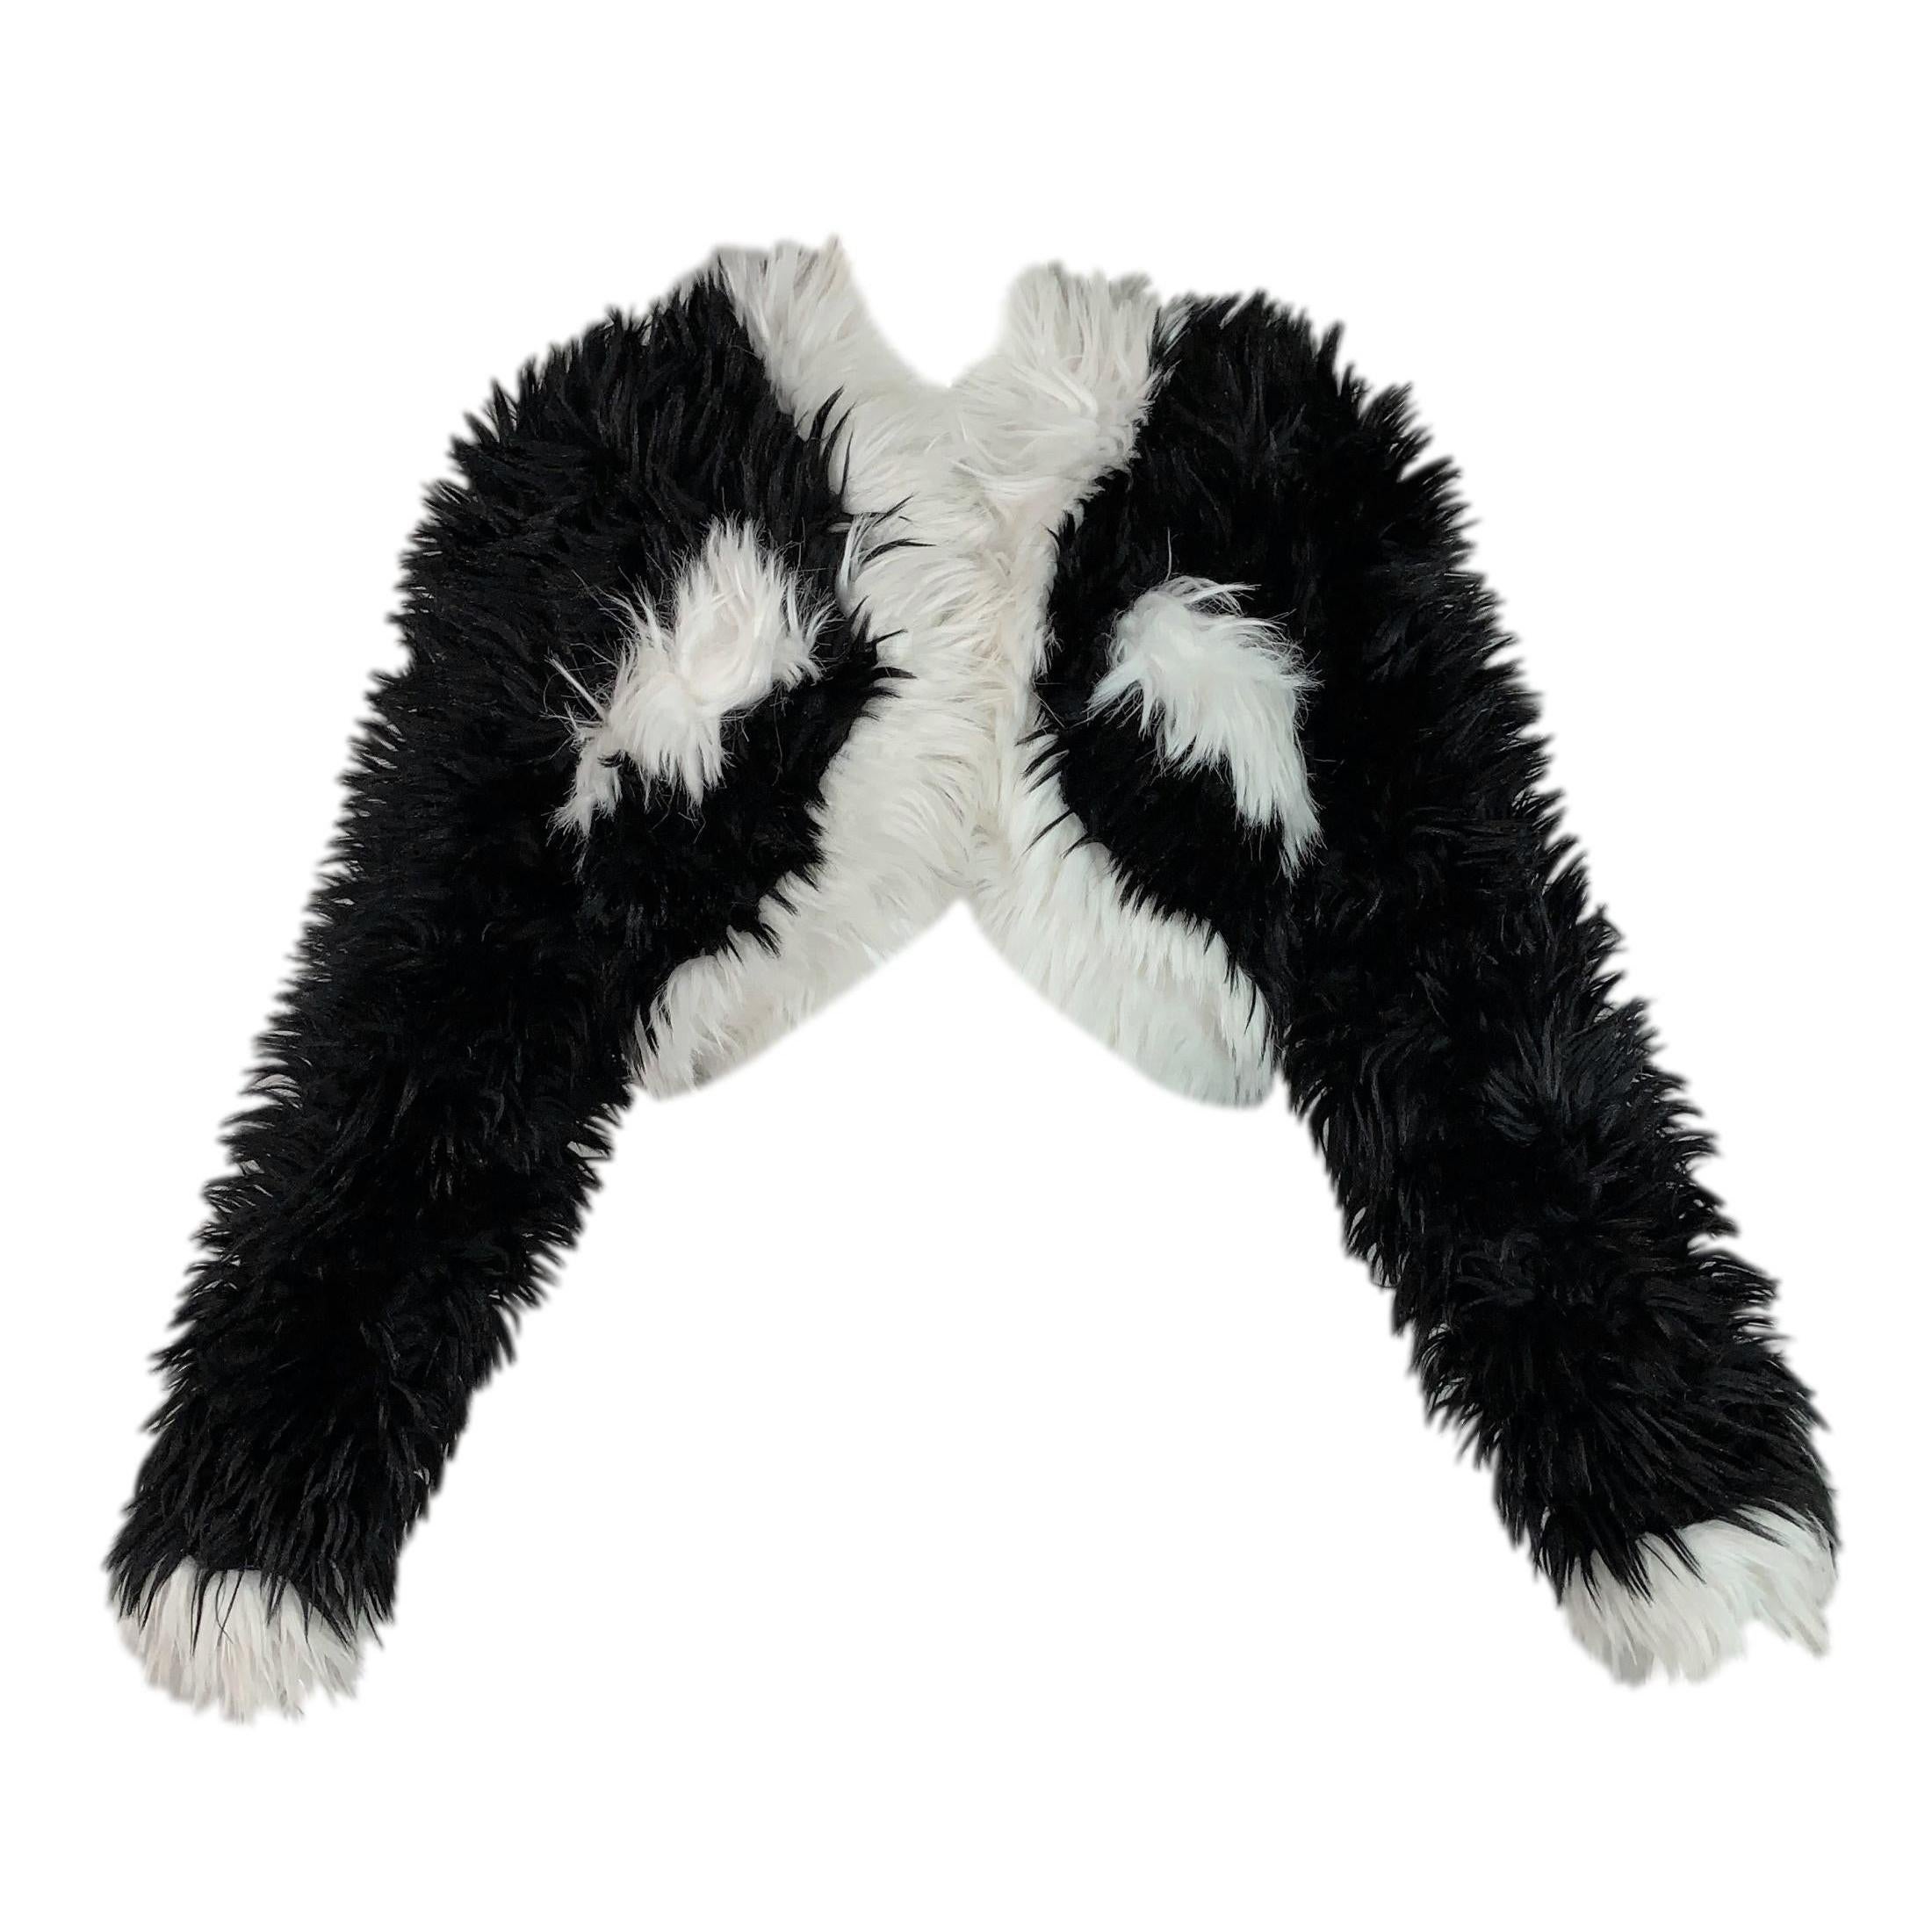 F/W 1994 Chanel Documented Runway Black & White Faux Fur Cropped Jacket For Sale